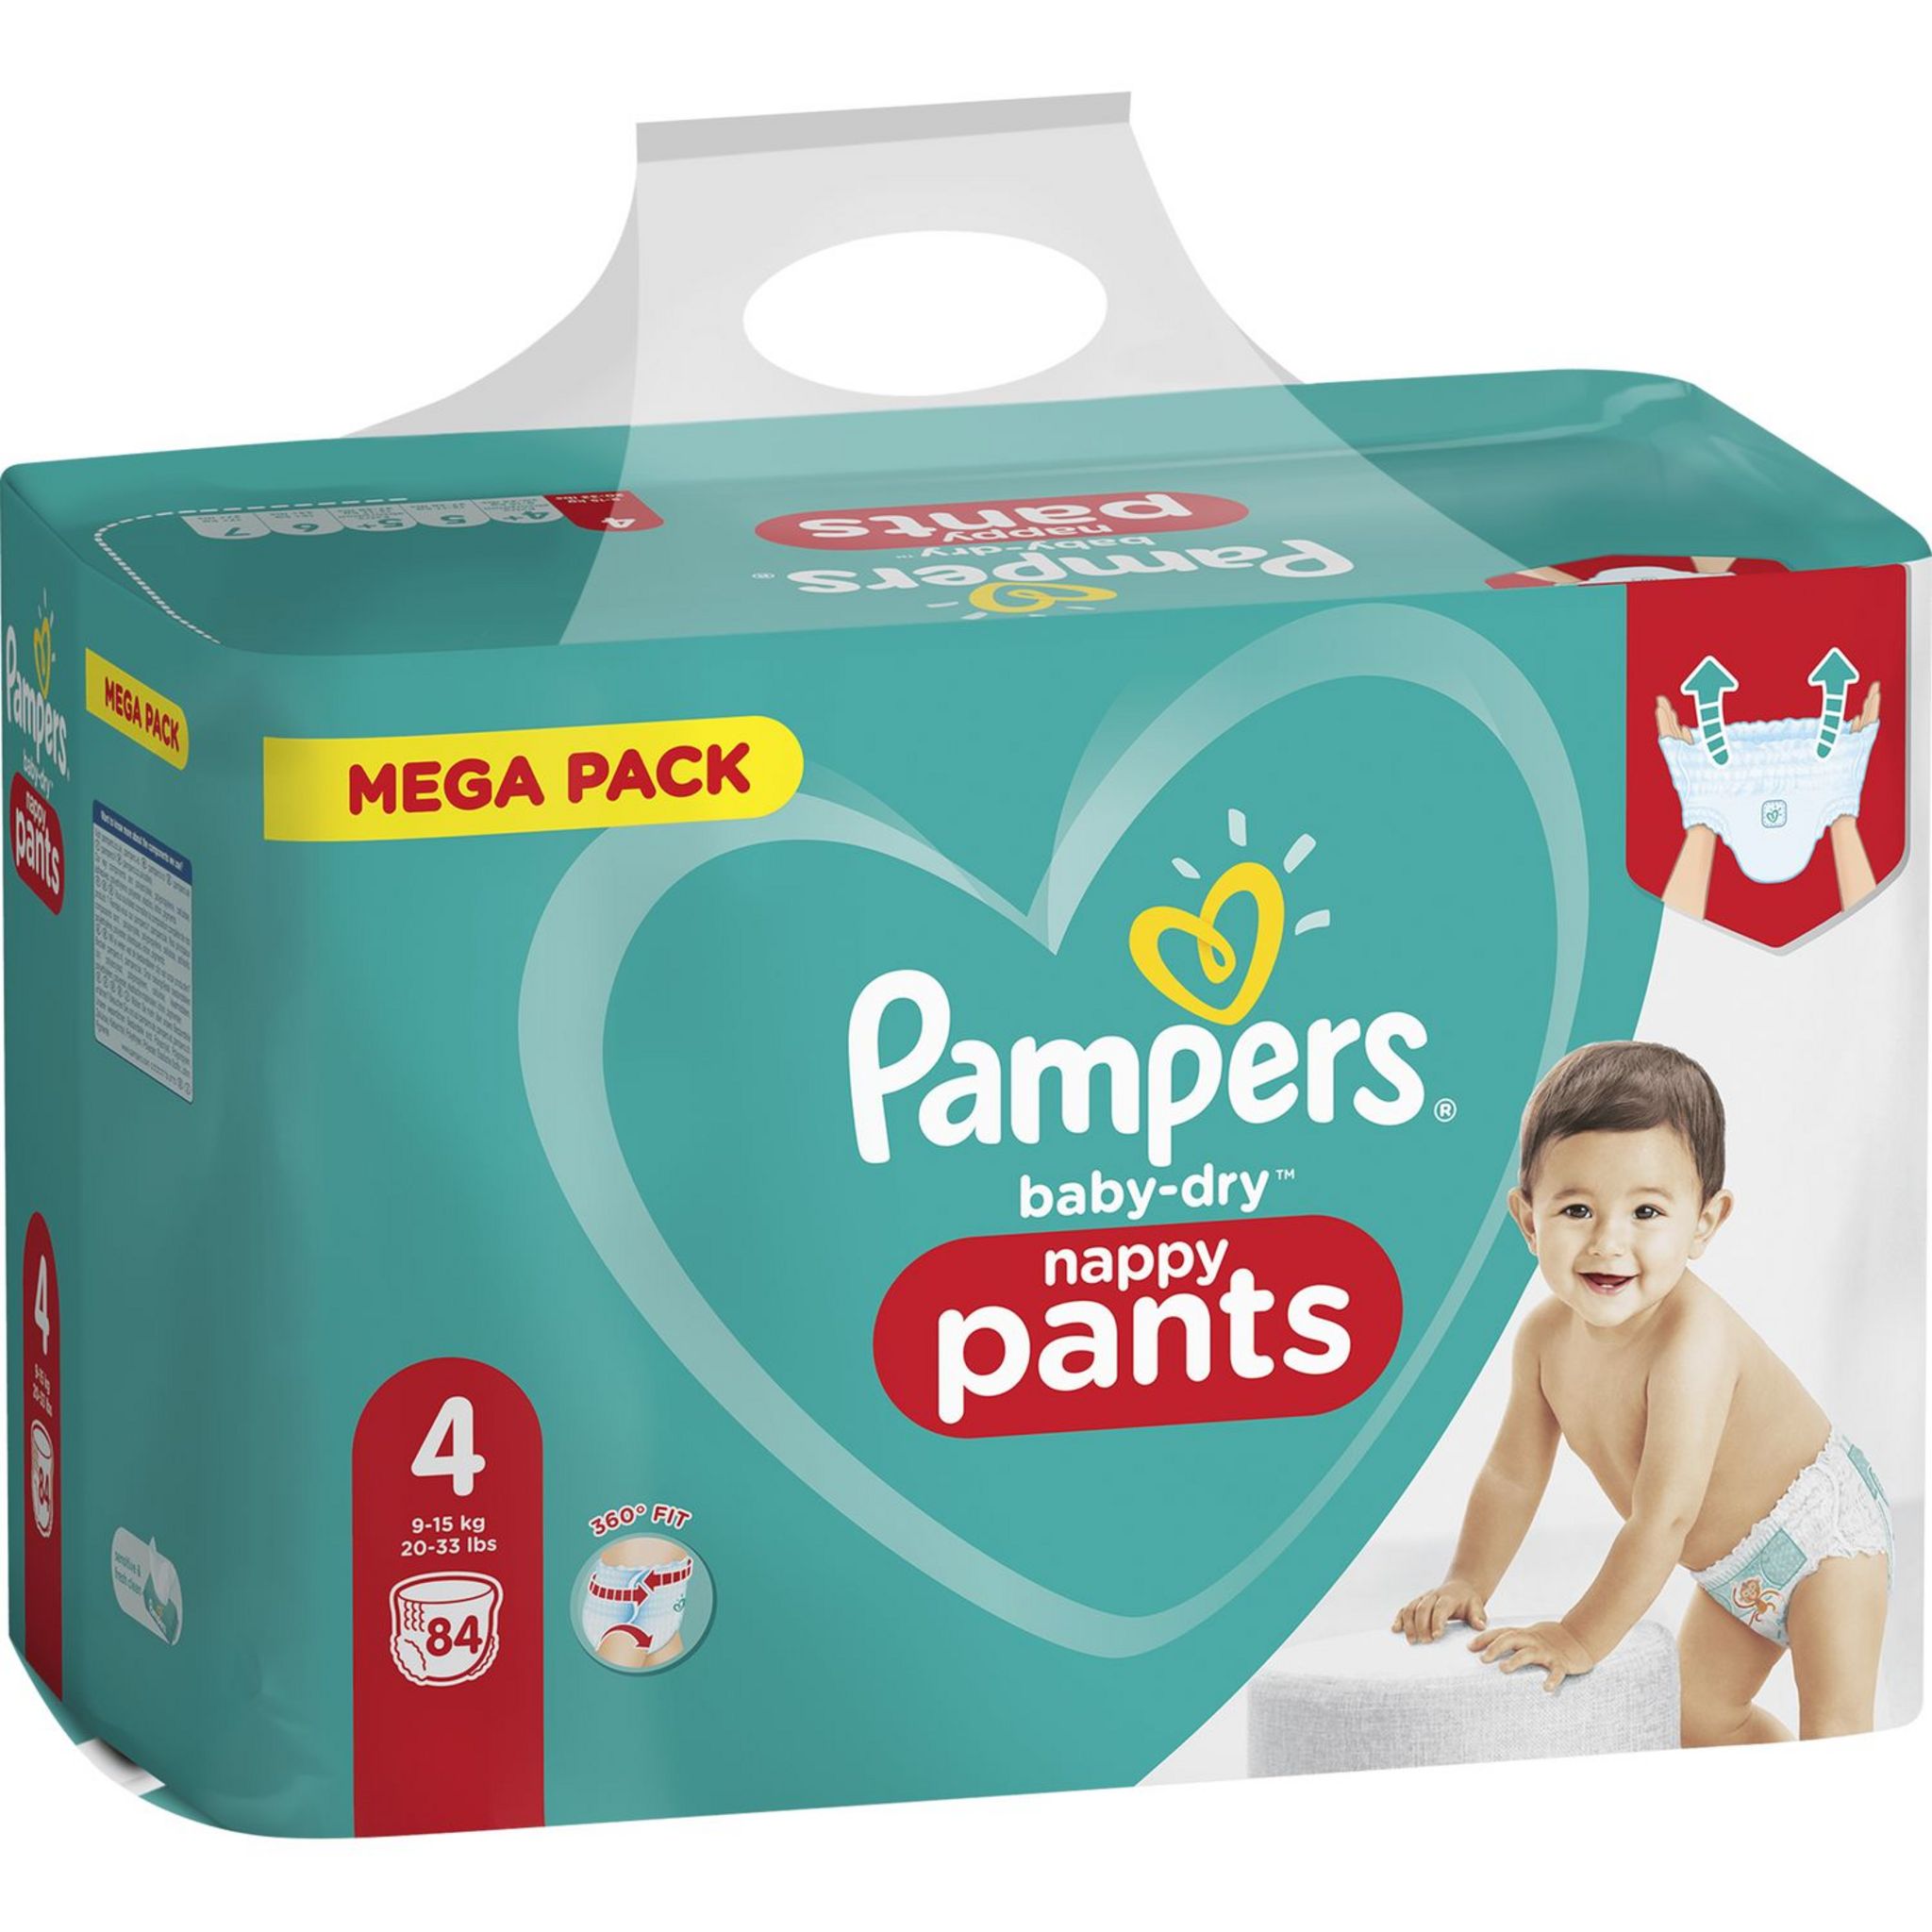 Pampers Couches Pants Taille 4 9-14kg 60uts